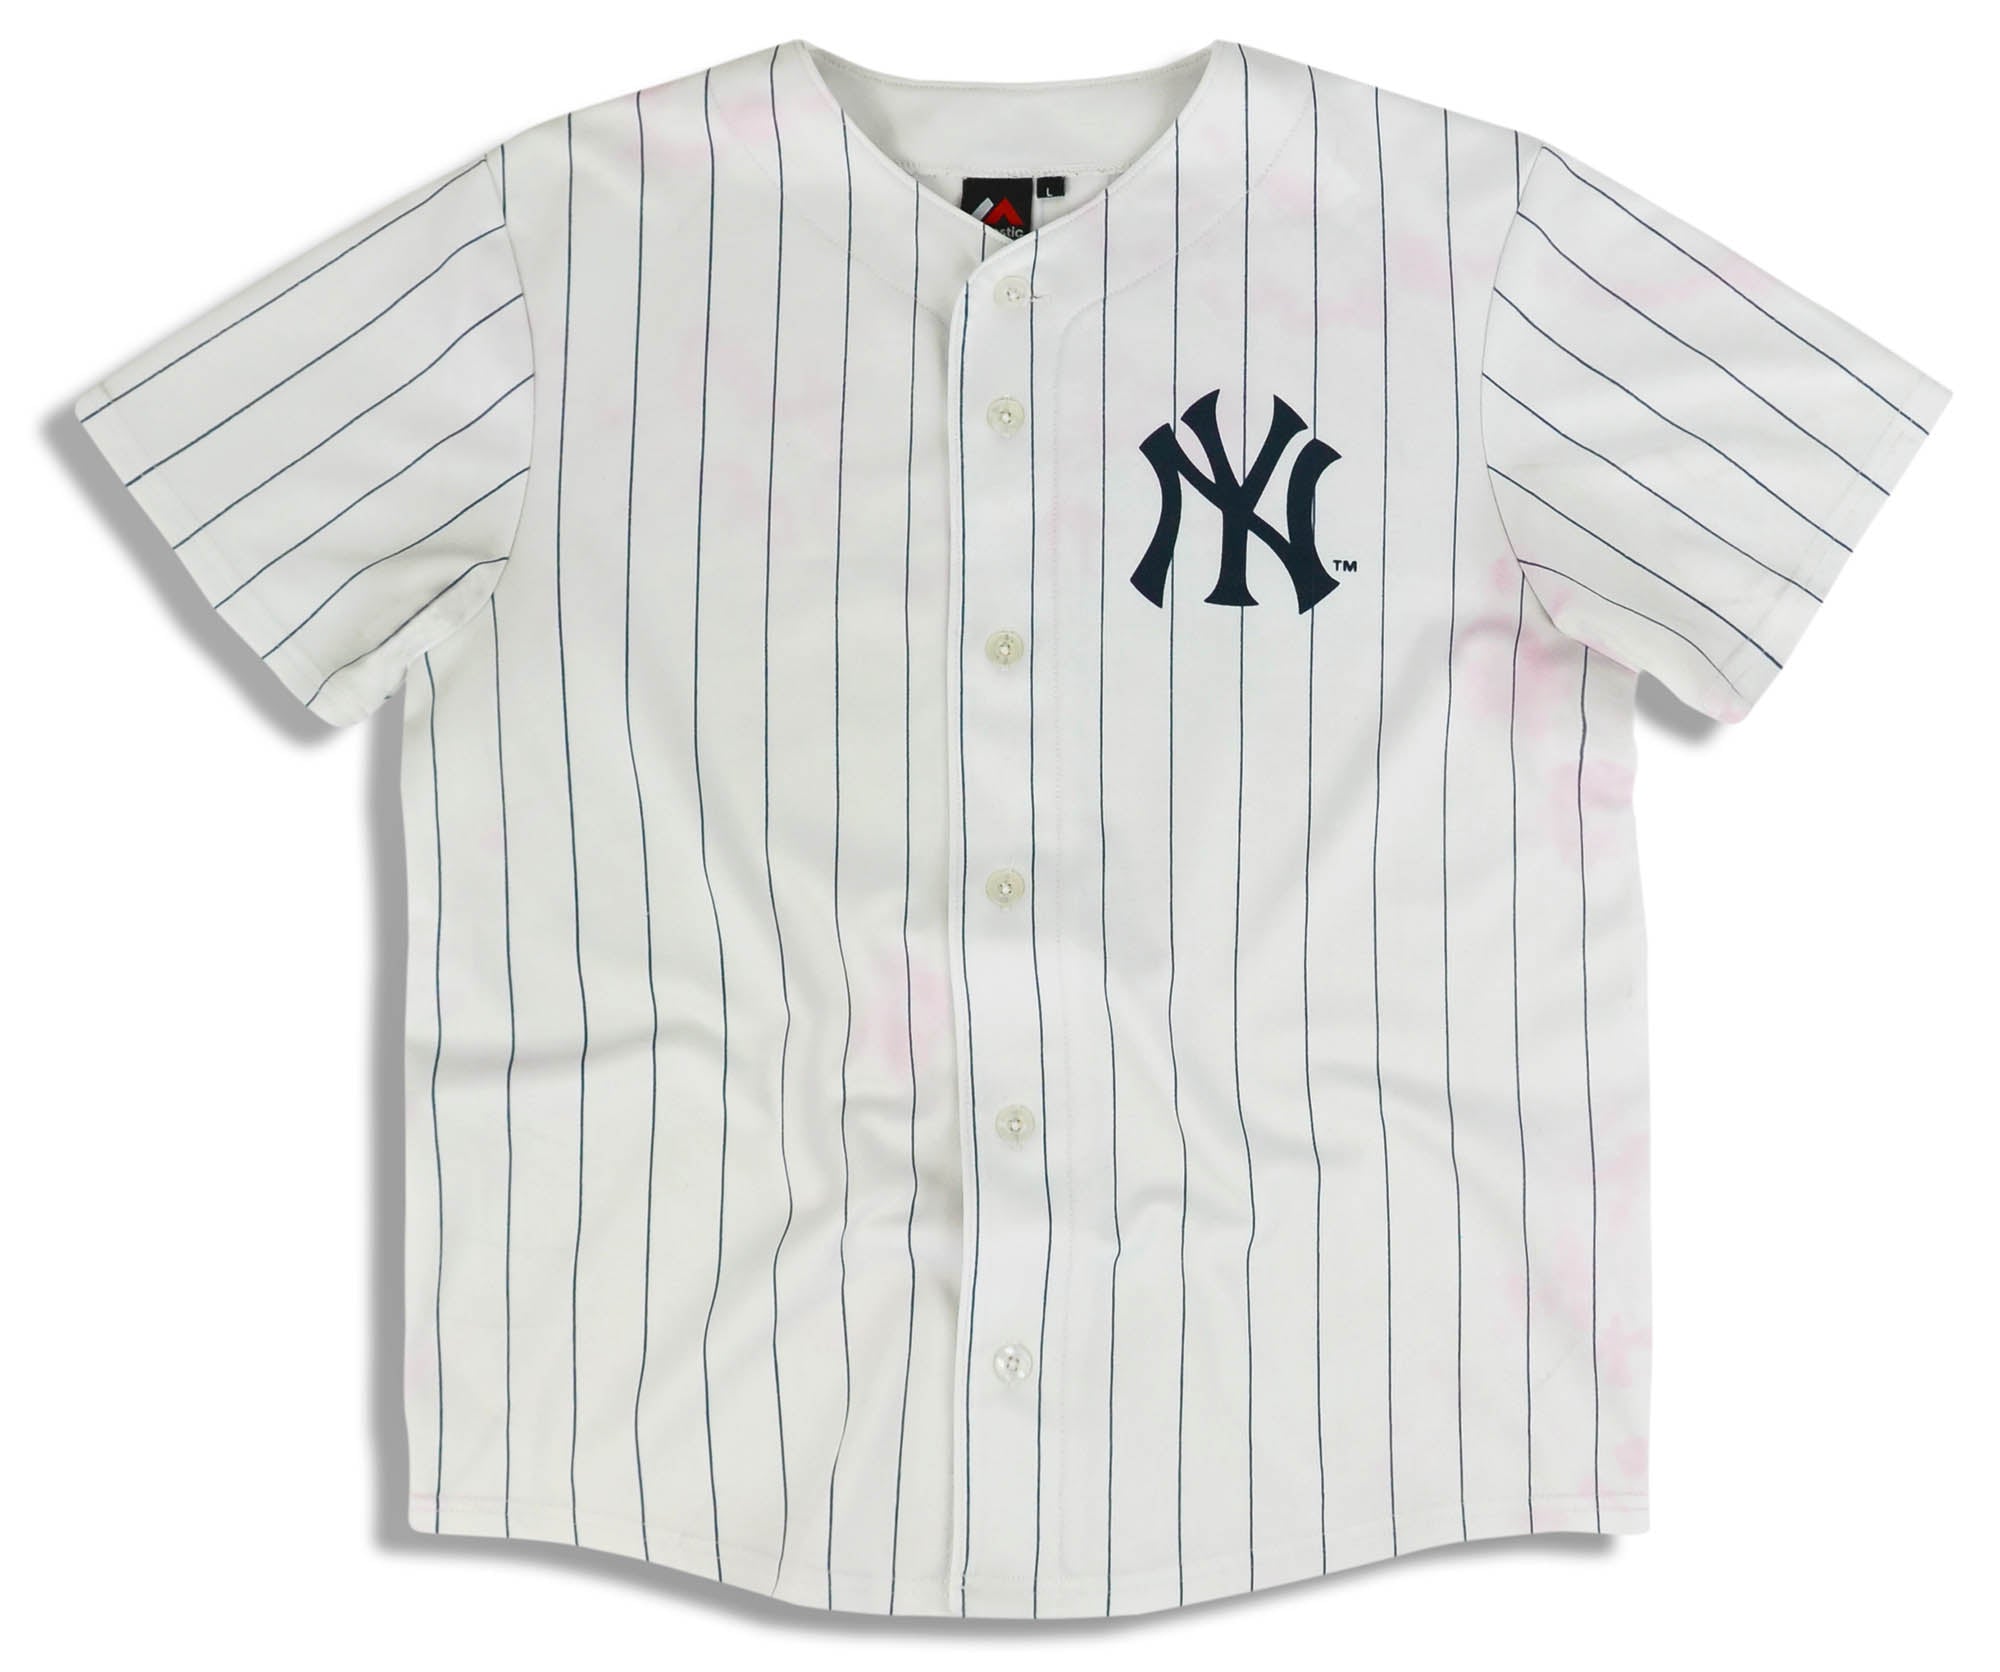 2000's NEW YORK YANKEES MAJESTIC JERSEY (HOME) L